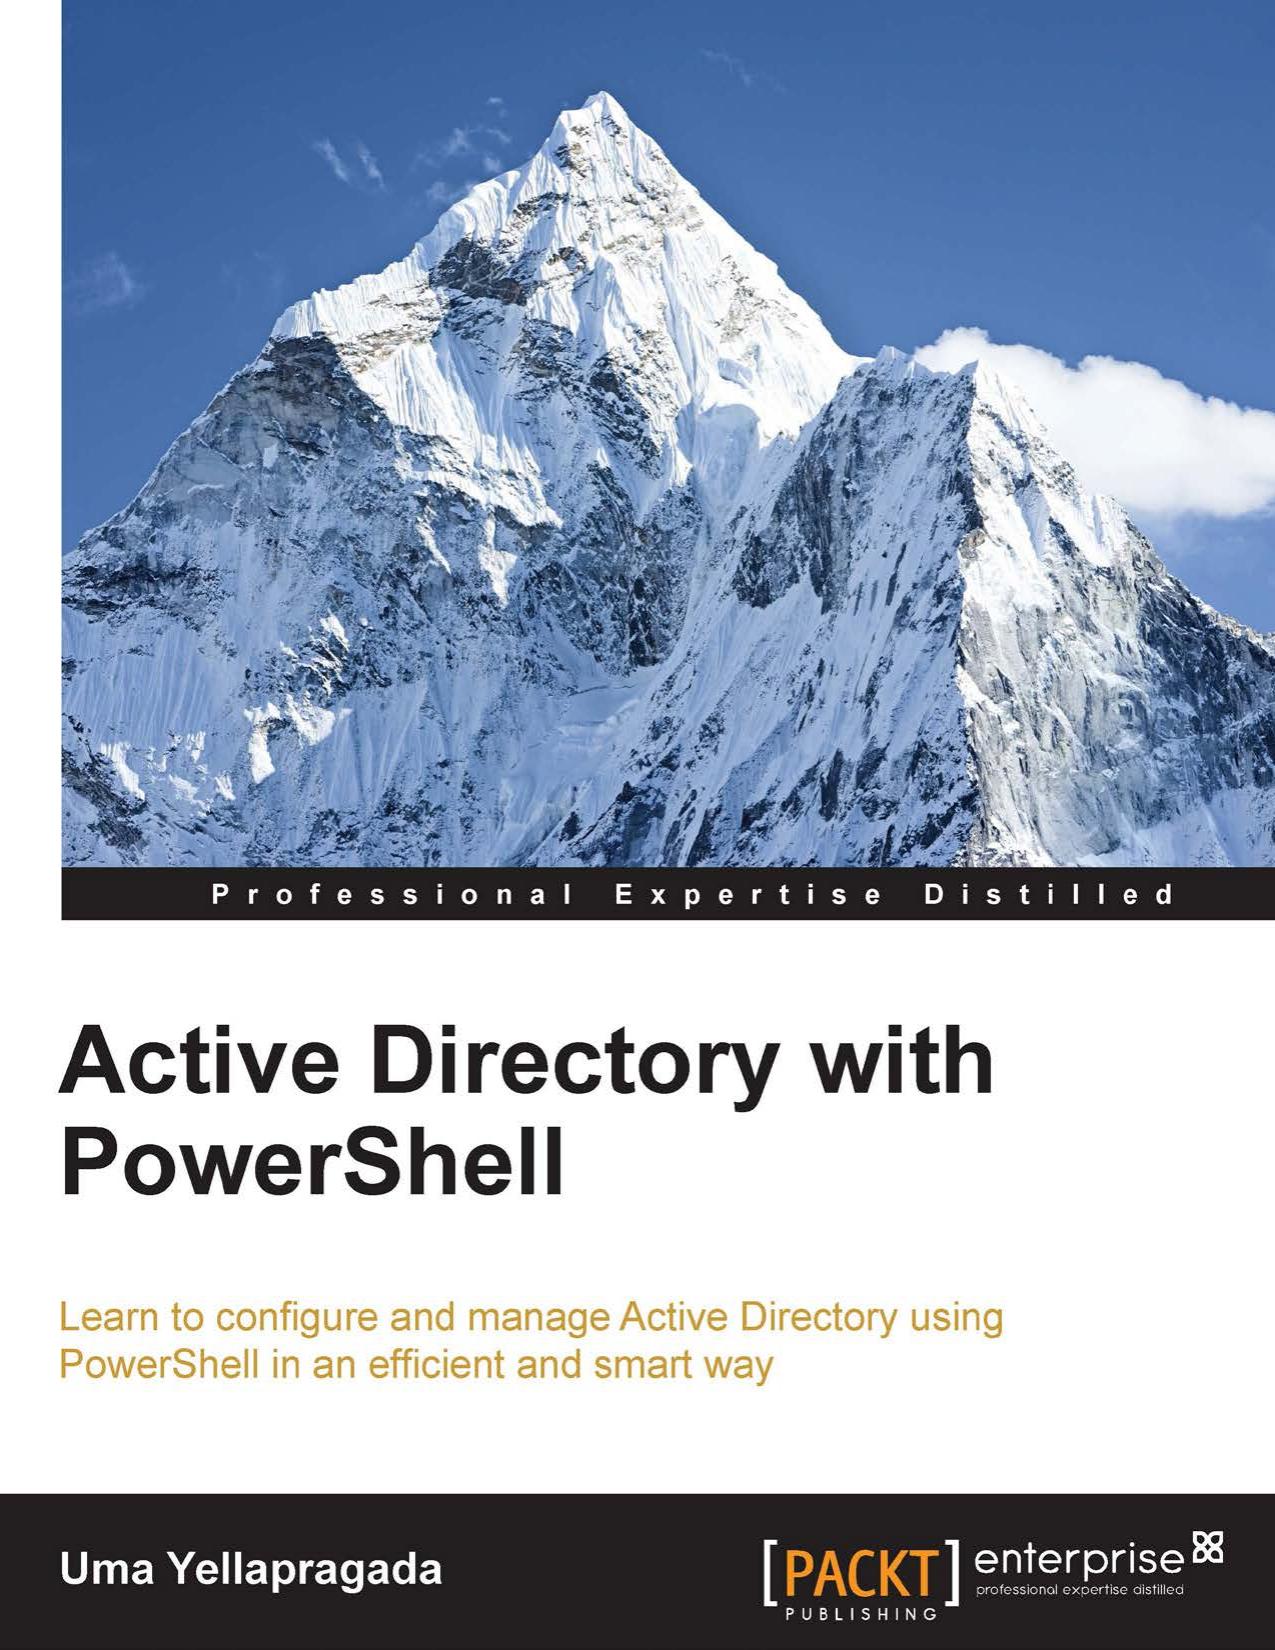 Active Directory With PowerShell